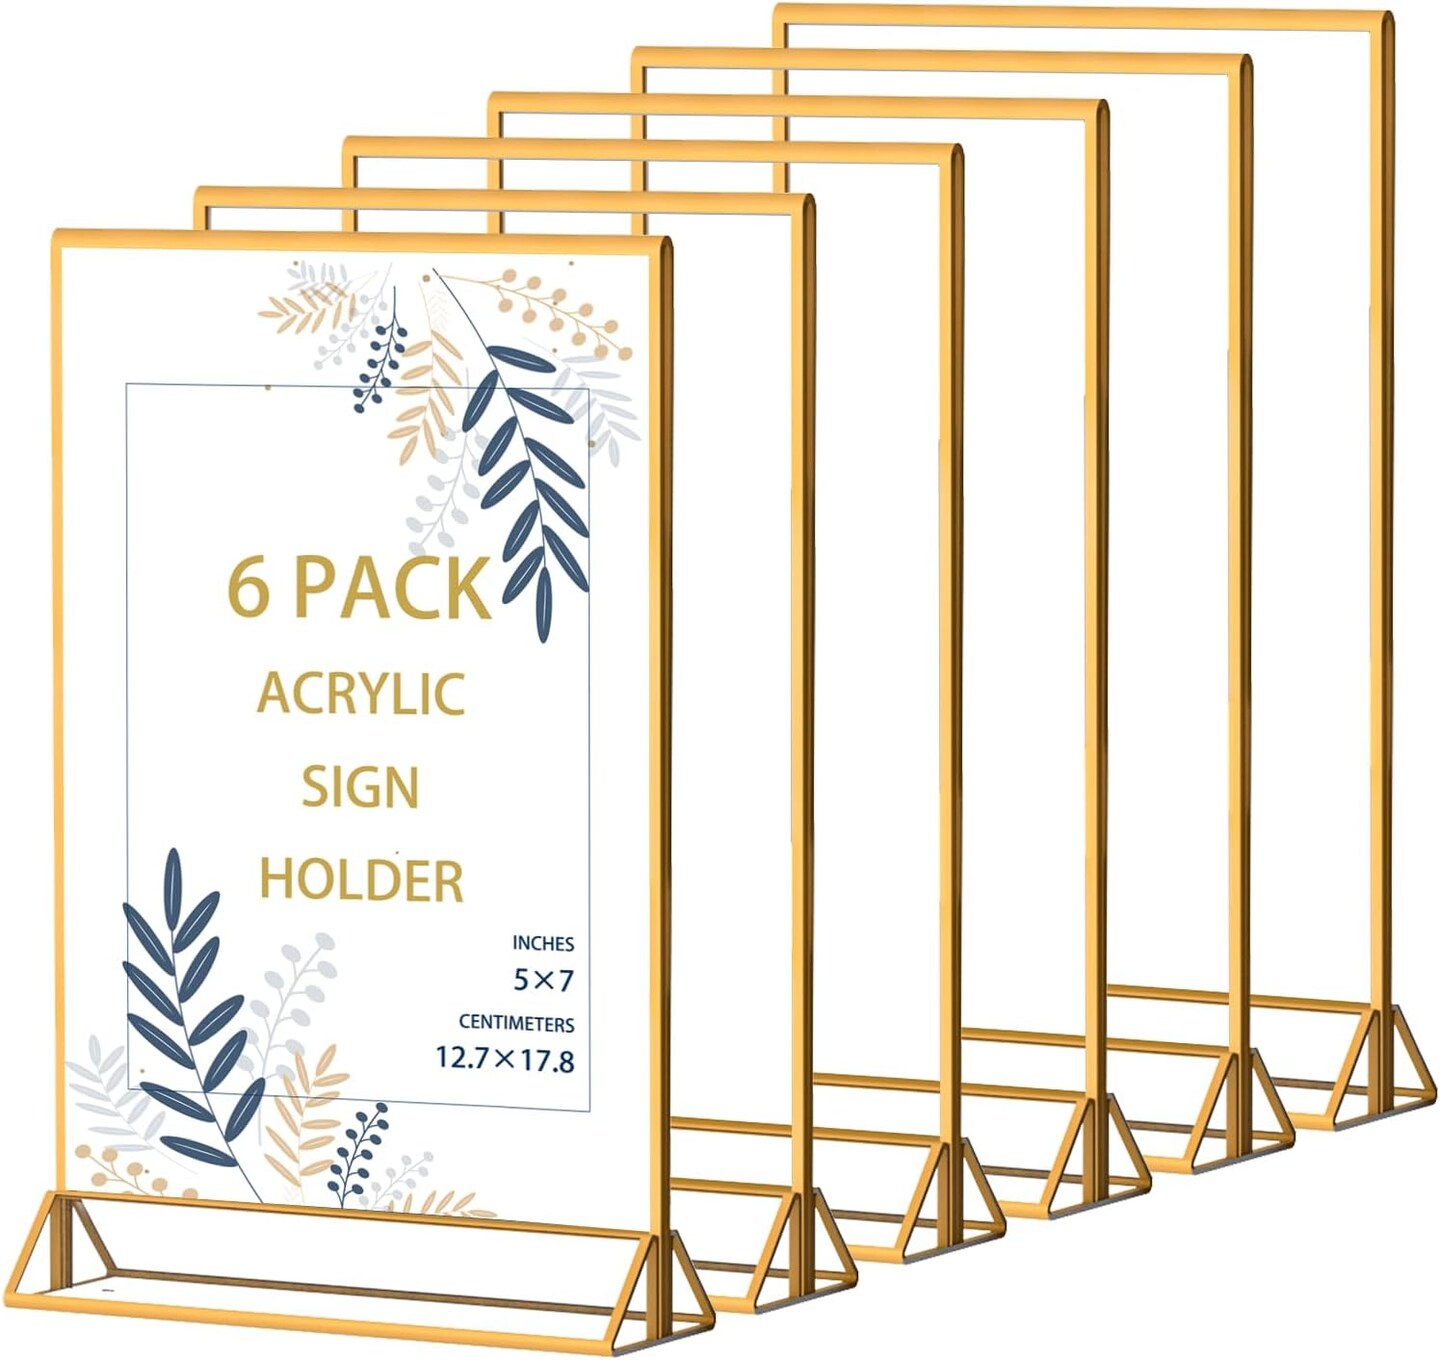 danoni Acrylic Sign Holder, Wedding Table Number Frames with Gold Borders, Double Sided Display for Menu Holders, Clear Paper Stand Display for Party, Festival and Restaurant (6 Pack)